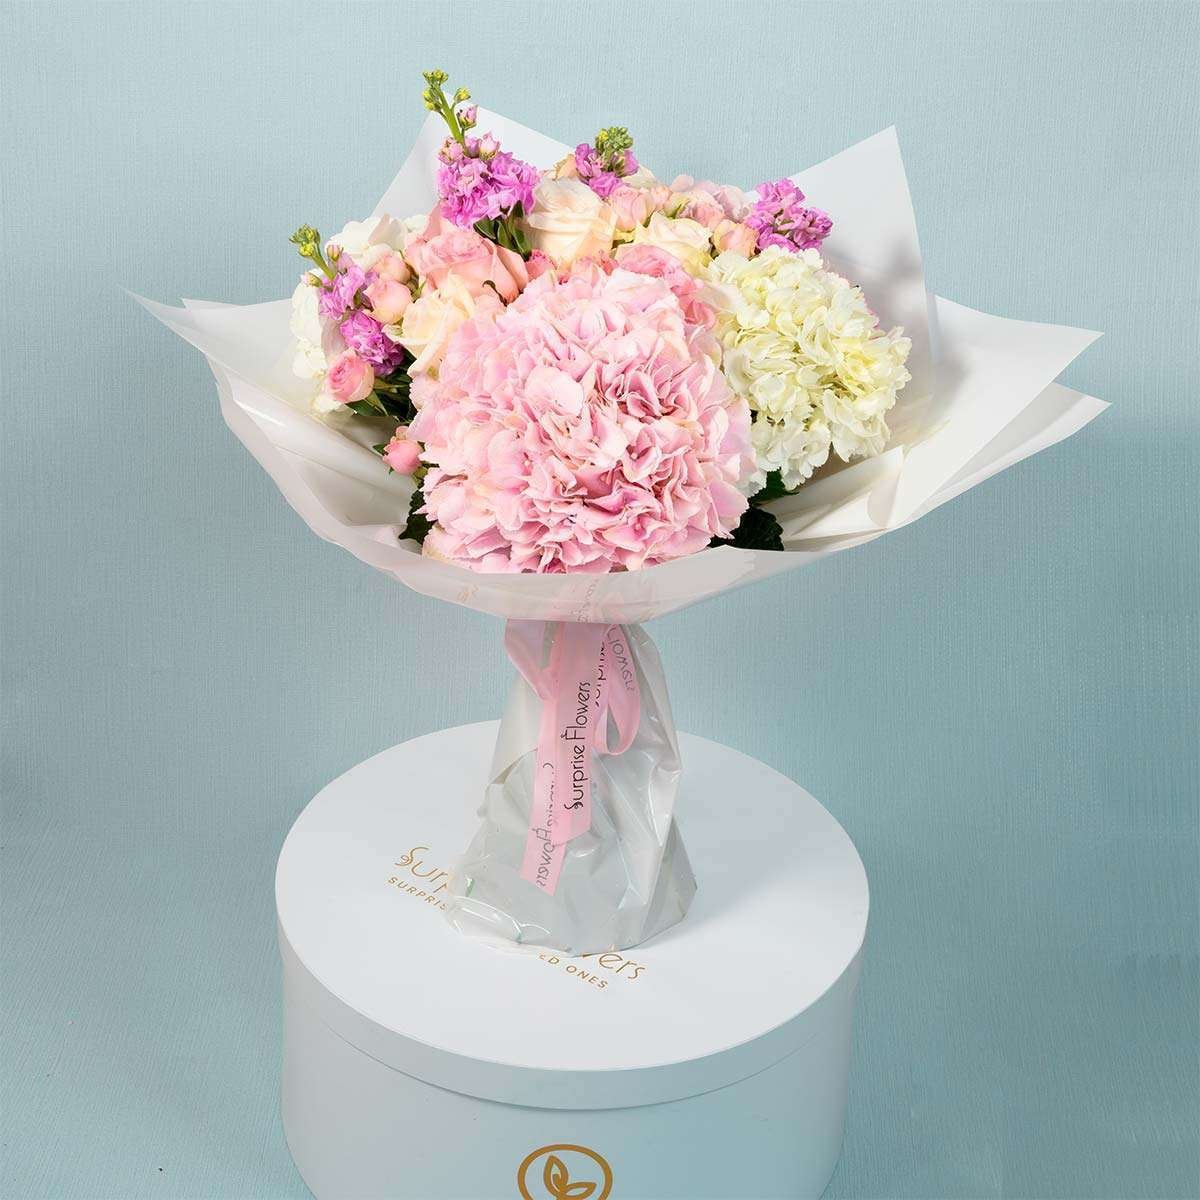 Classy Hand Tied Bouquet In Pink & White